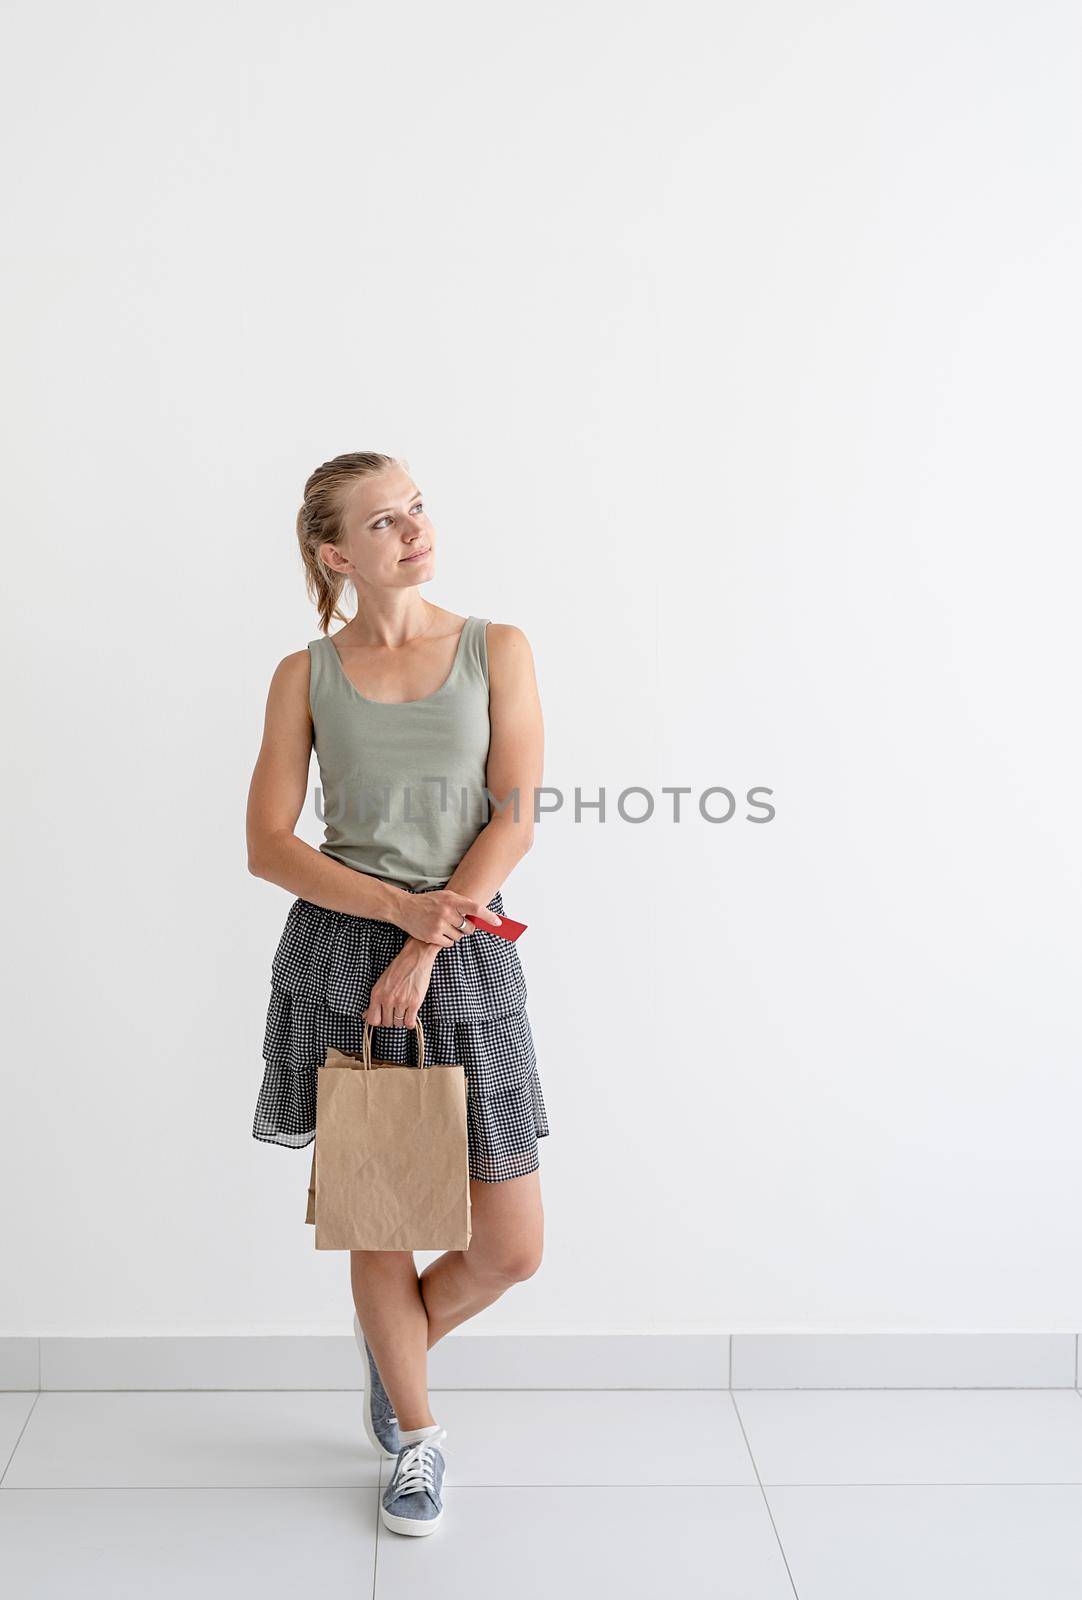 Online shopping concept. Young smiling woman holding eco friendly shopping bags and creadit card